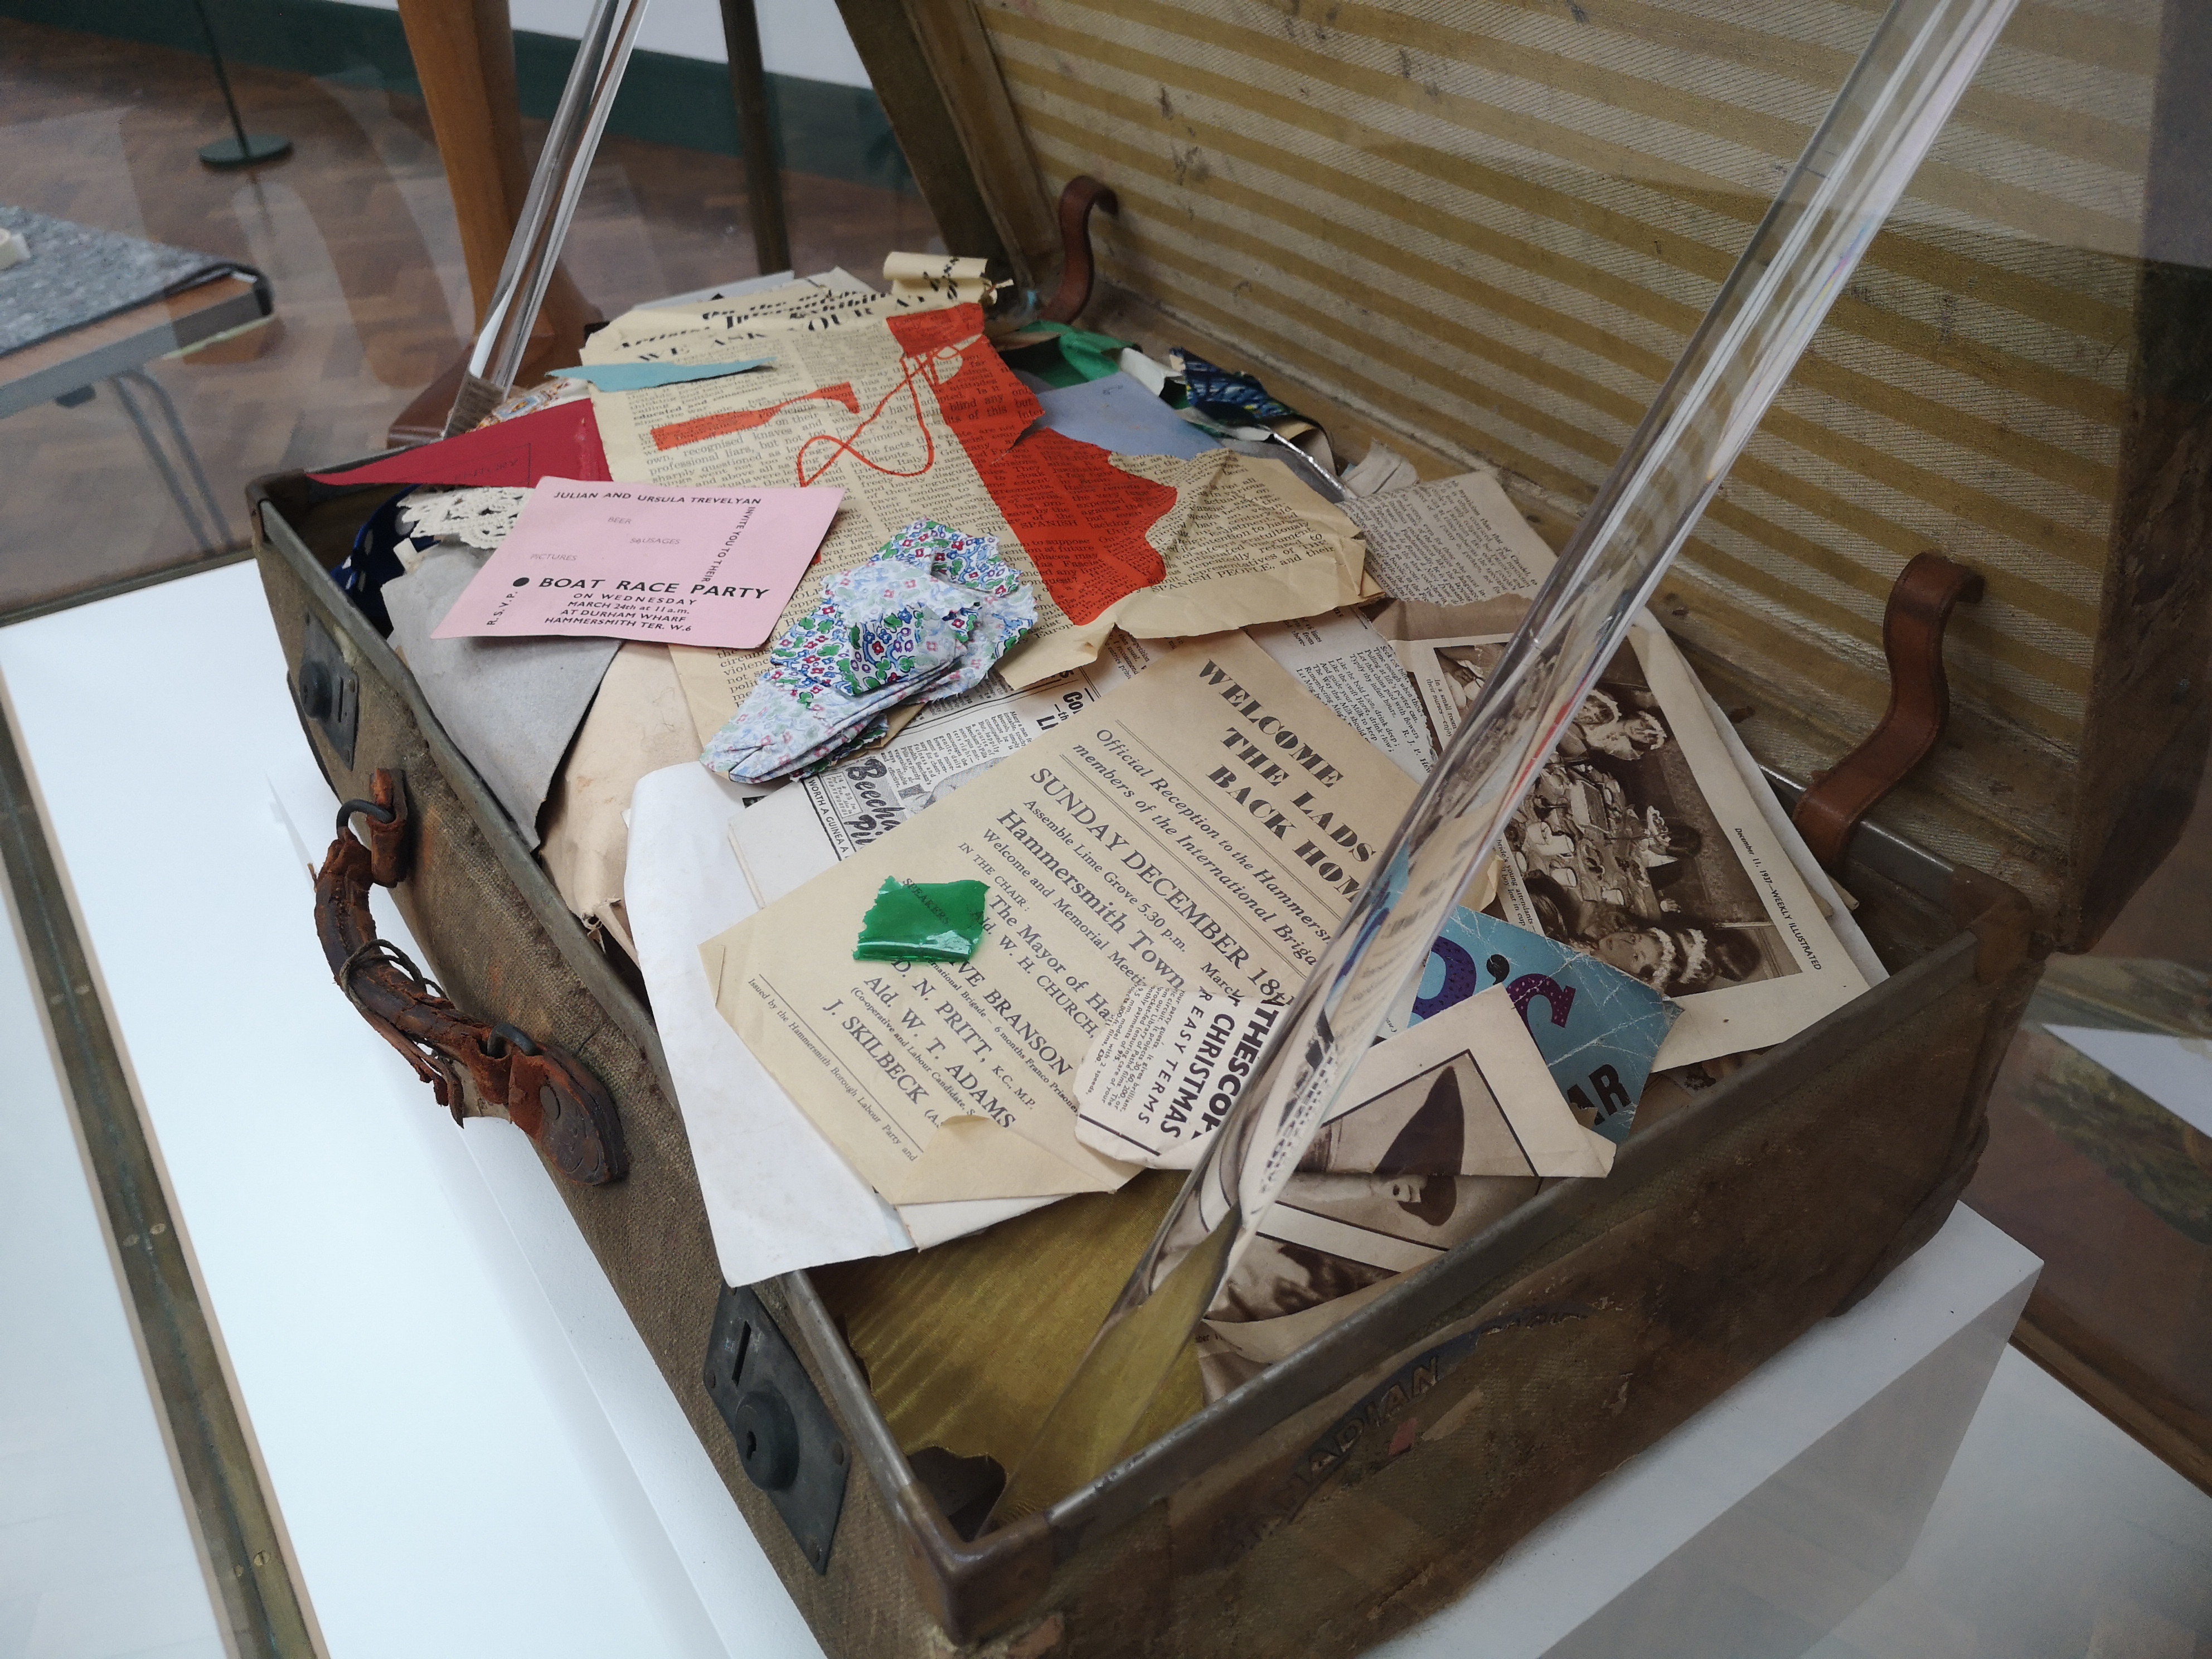 Trevelyan's suitcase of collage parts